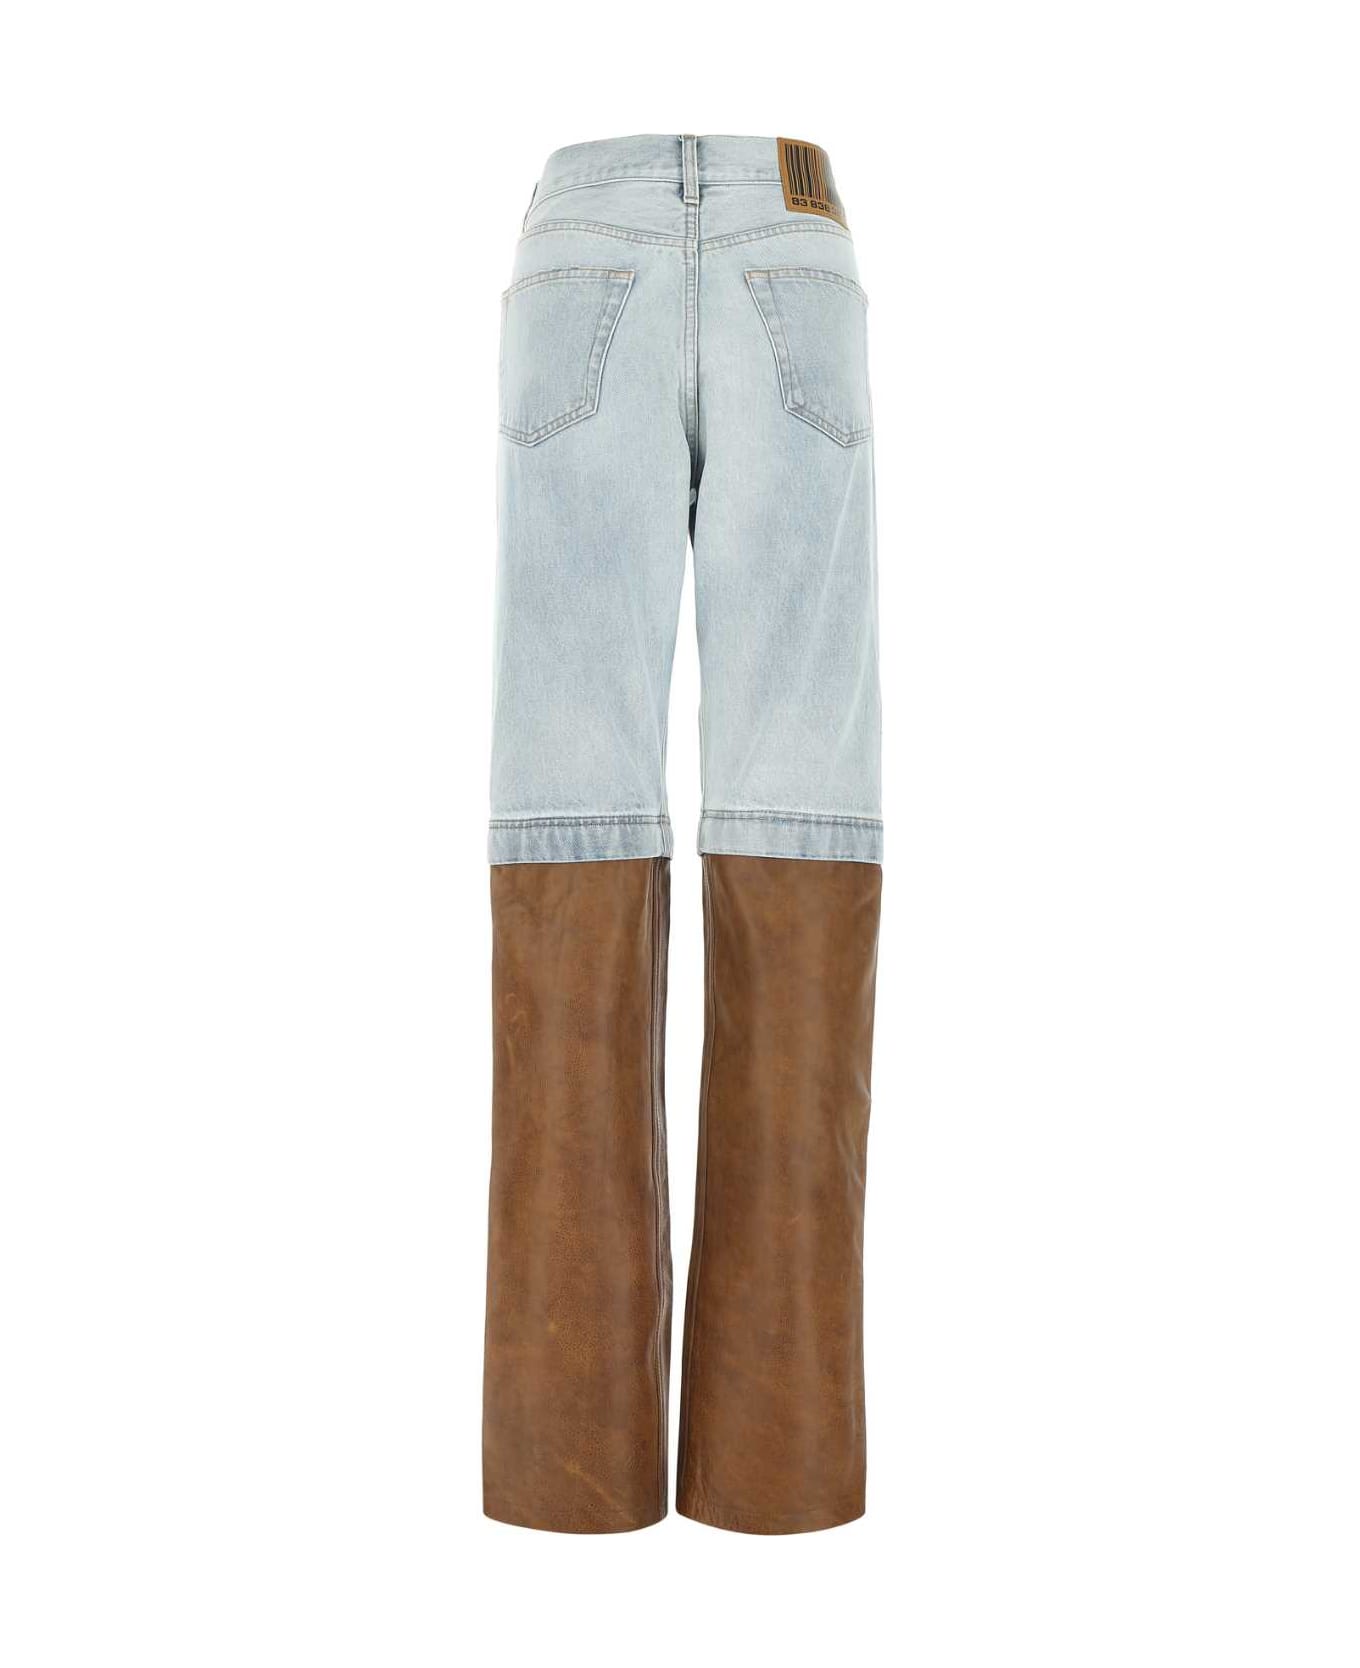 VTMNTS Two-tone Denim And Leather Jeans - BROWNLIGHTBLUE